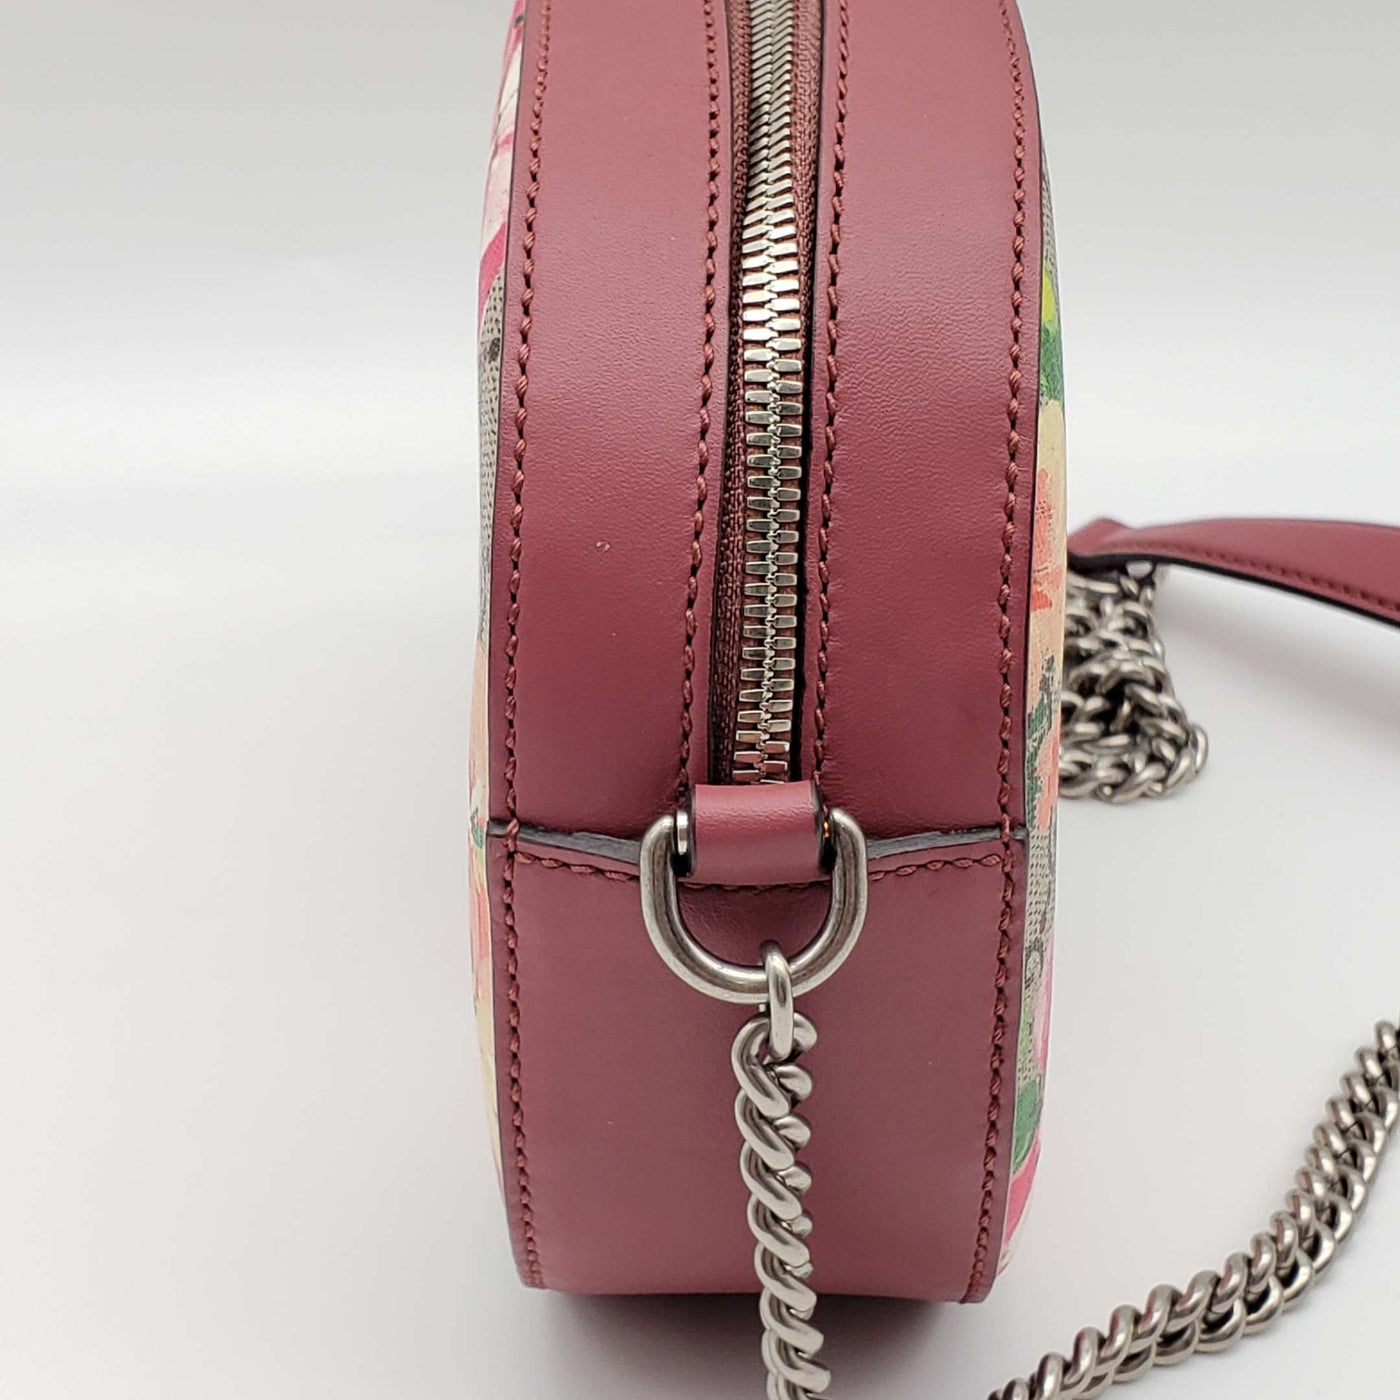 Gucci Soho Blooms Shoulder and Crossbody Bag - Luxury Cheaper